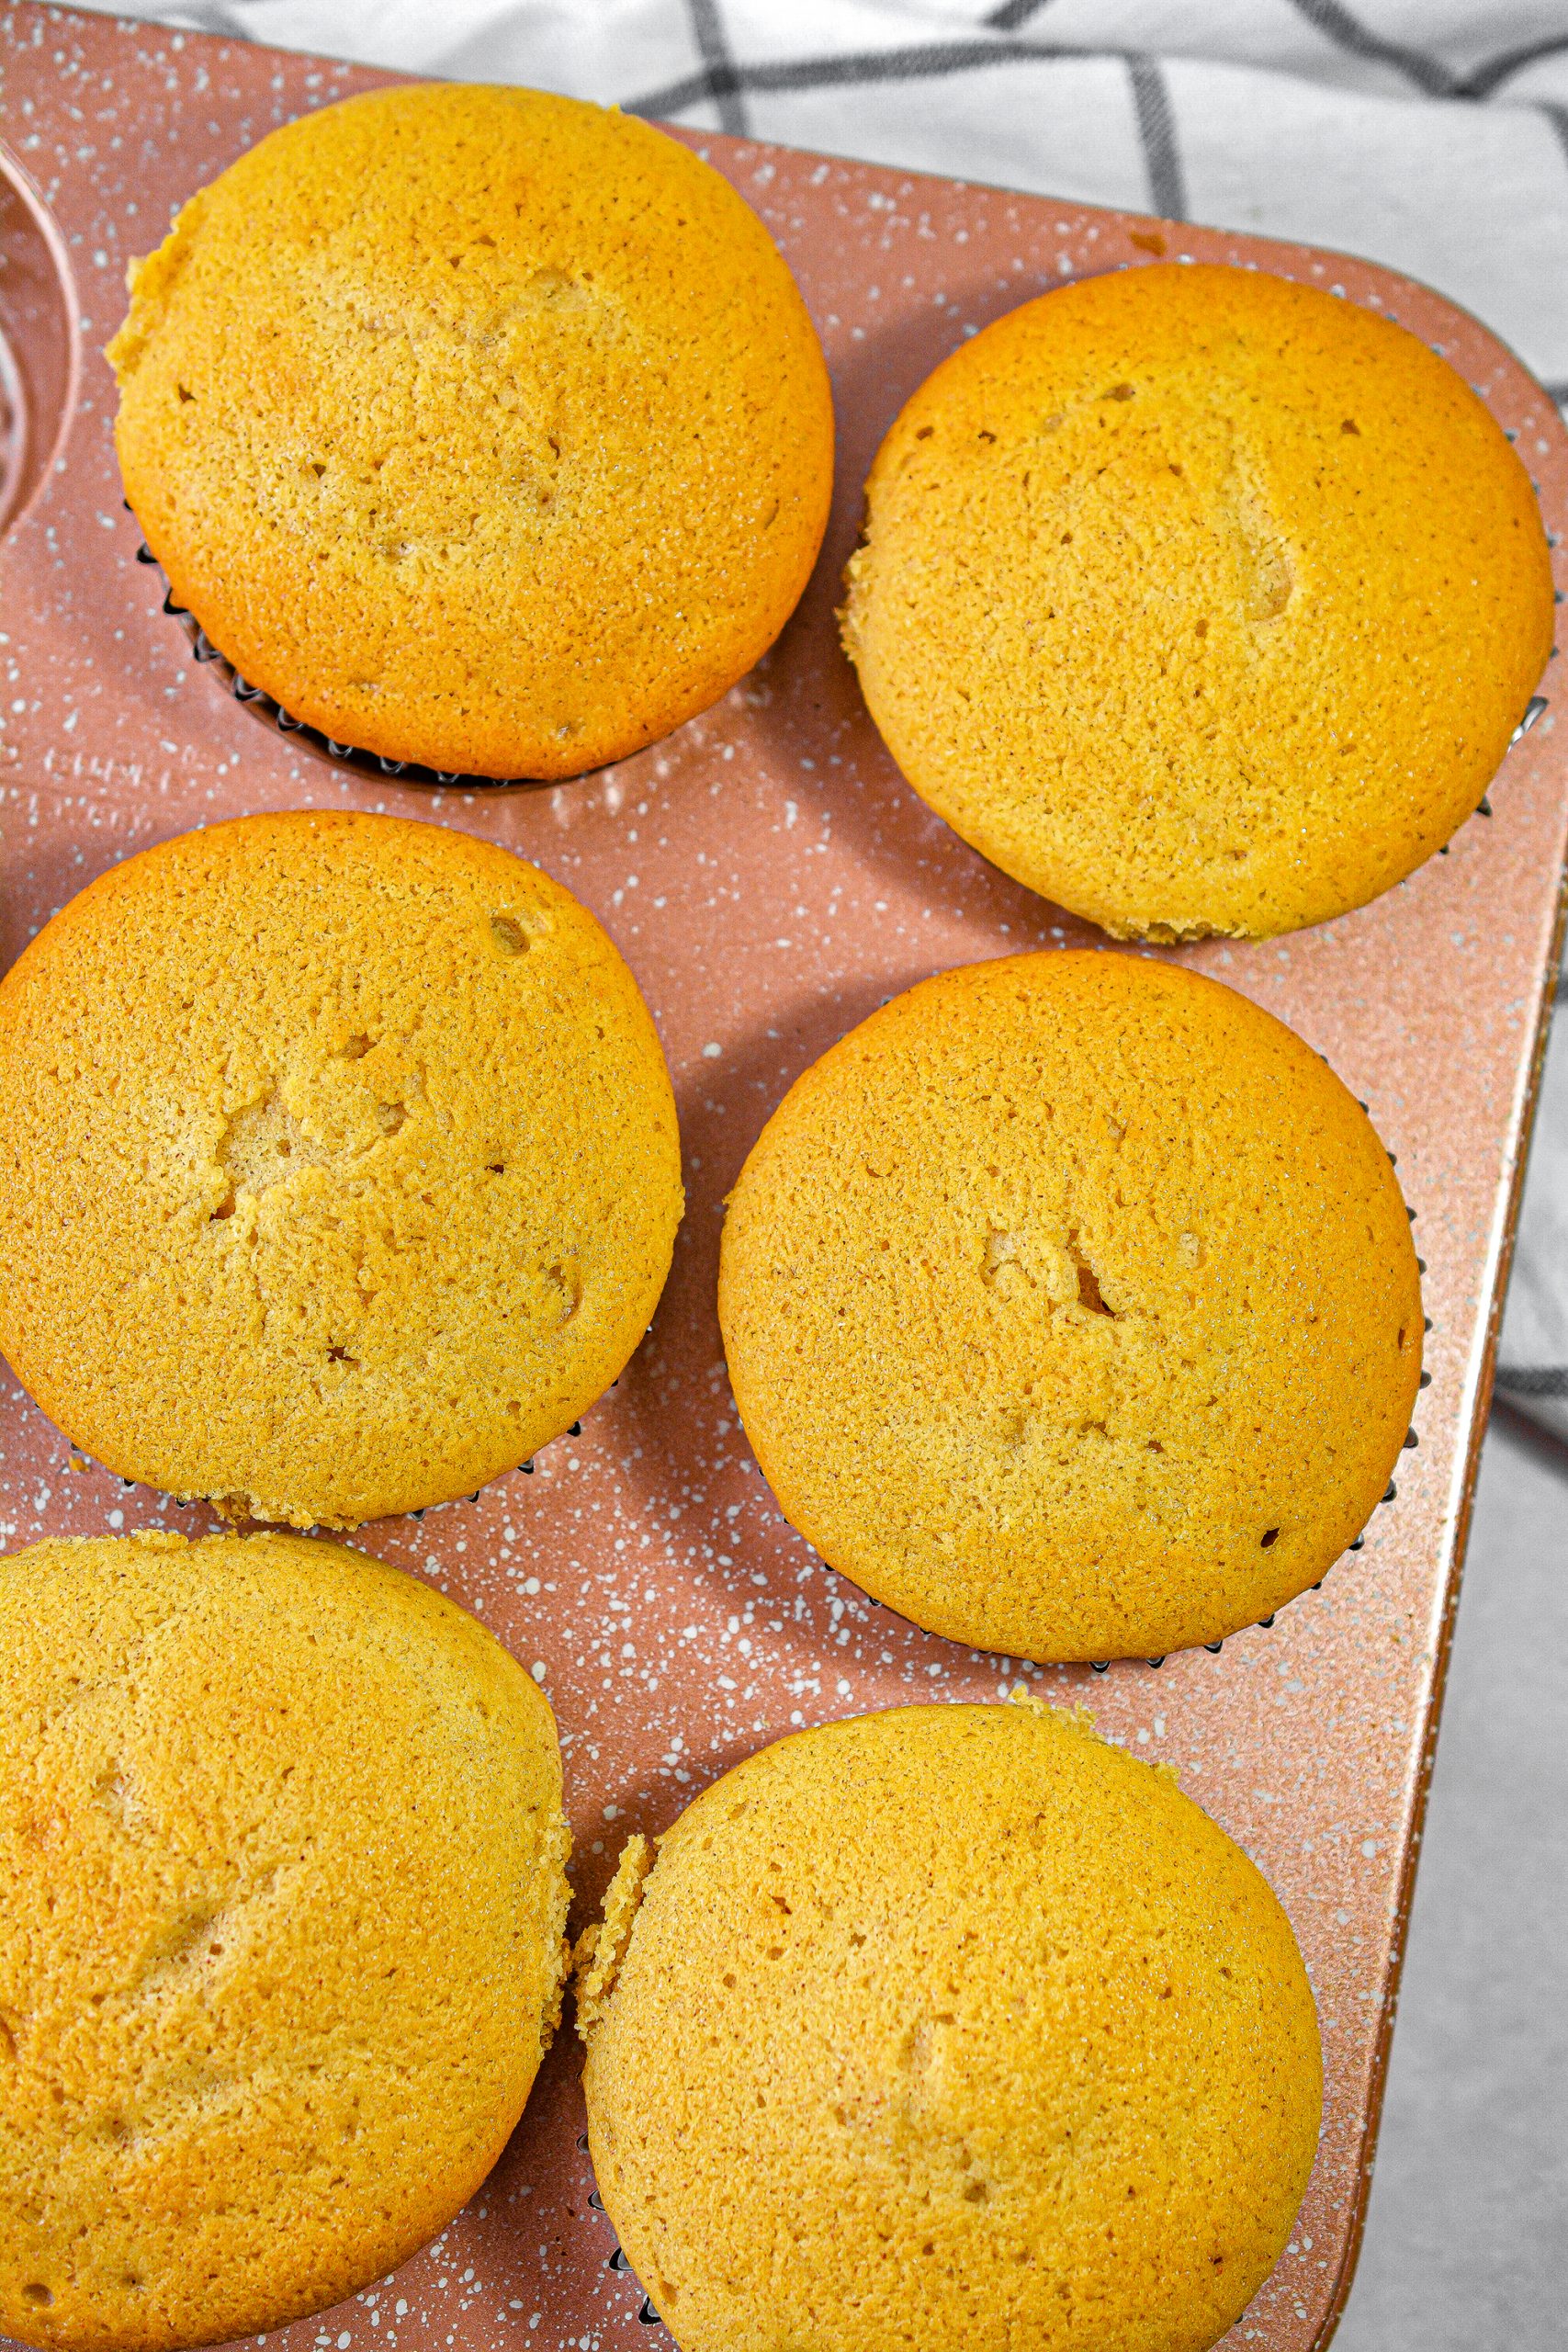 Bake for 20 minutes and allow the cupcakes to cool.